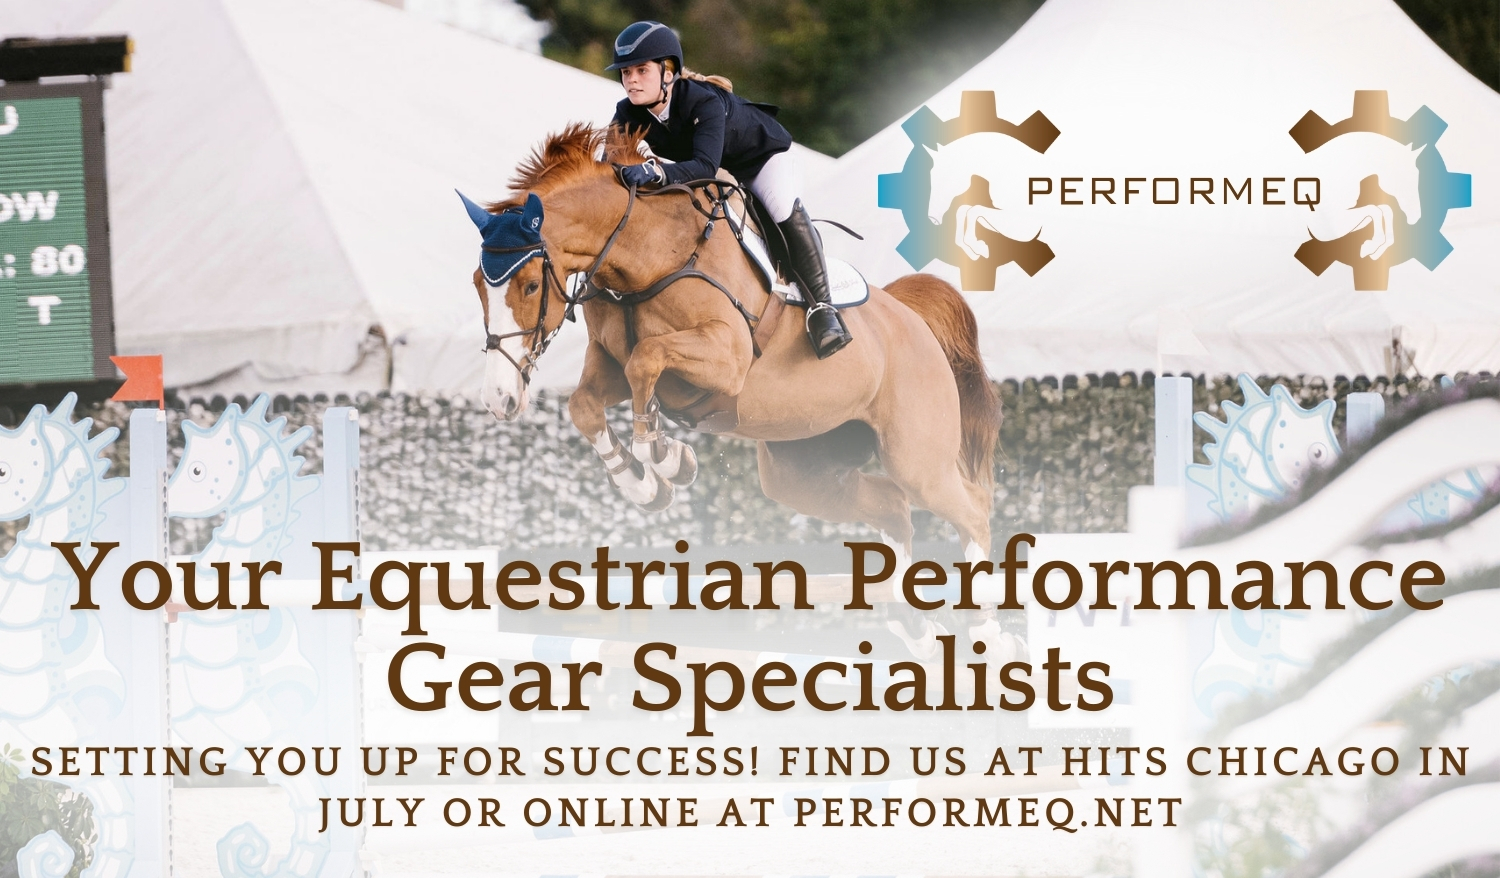 Your Equestrian Performance Gear Specialists